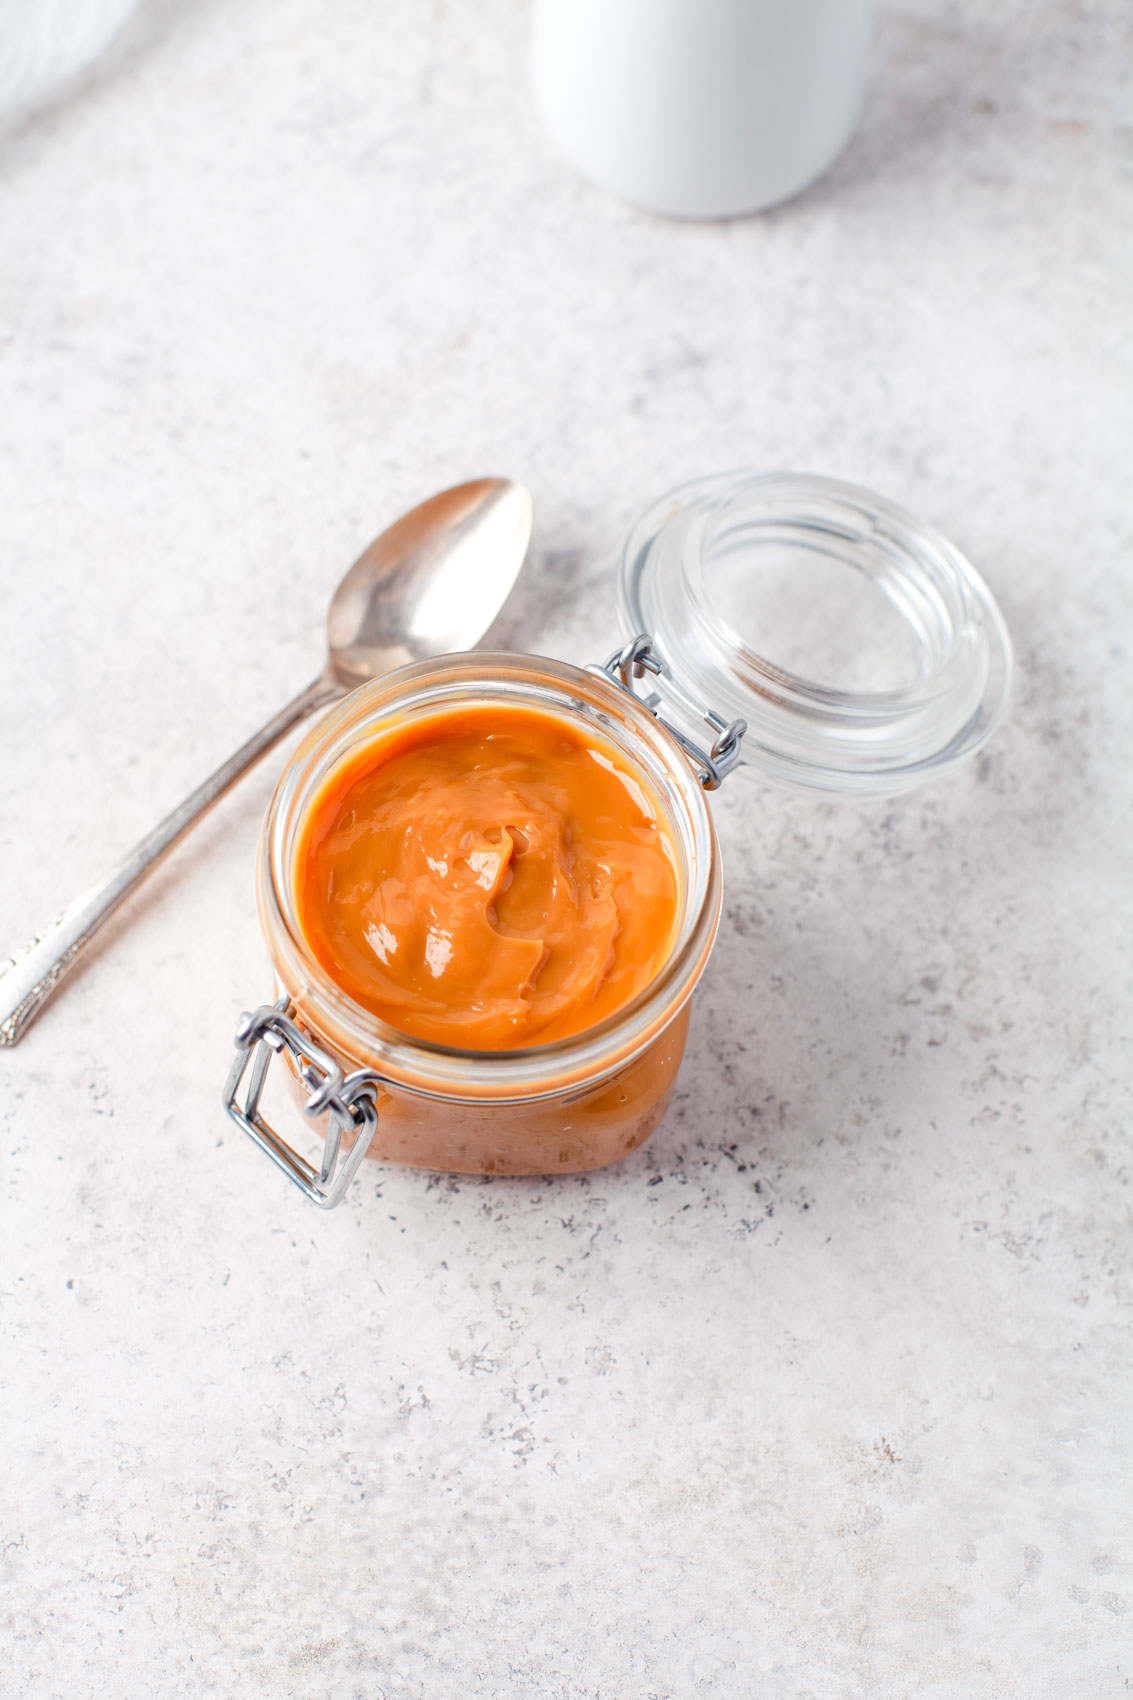 spoon next to a glass jar filled with dulce de leche